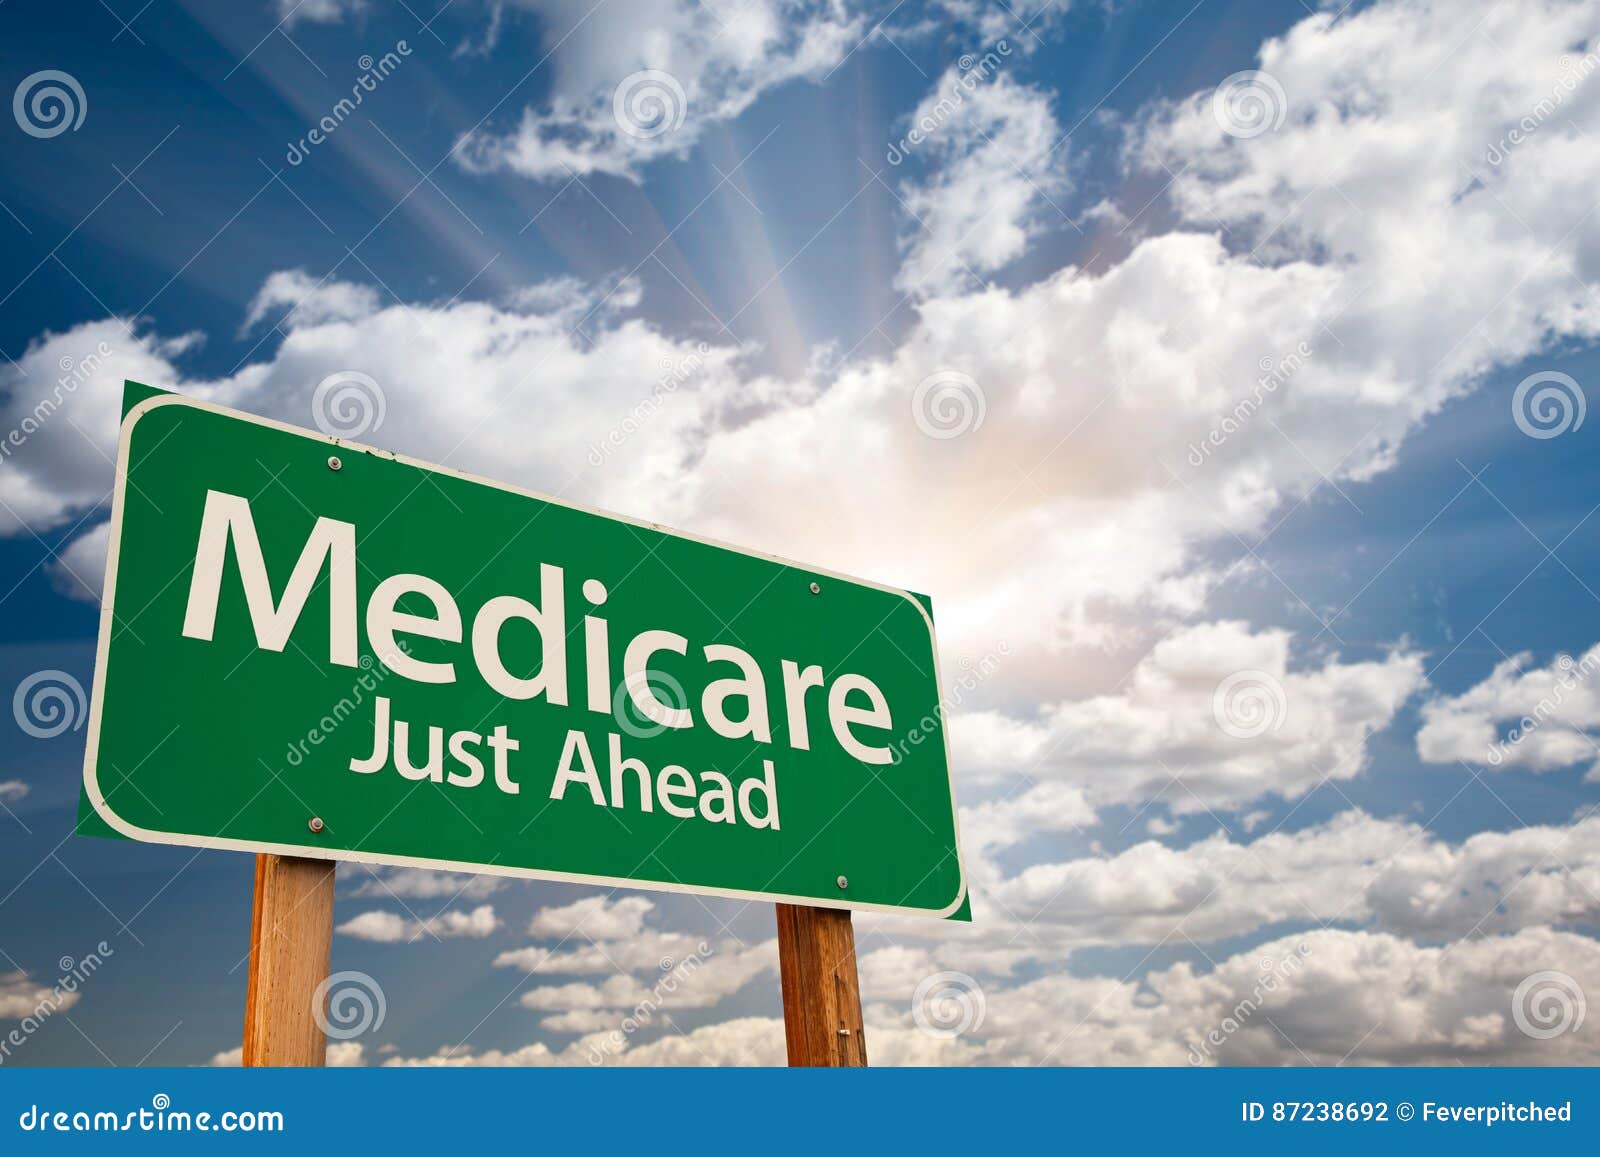 medicare green road sign over clouds